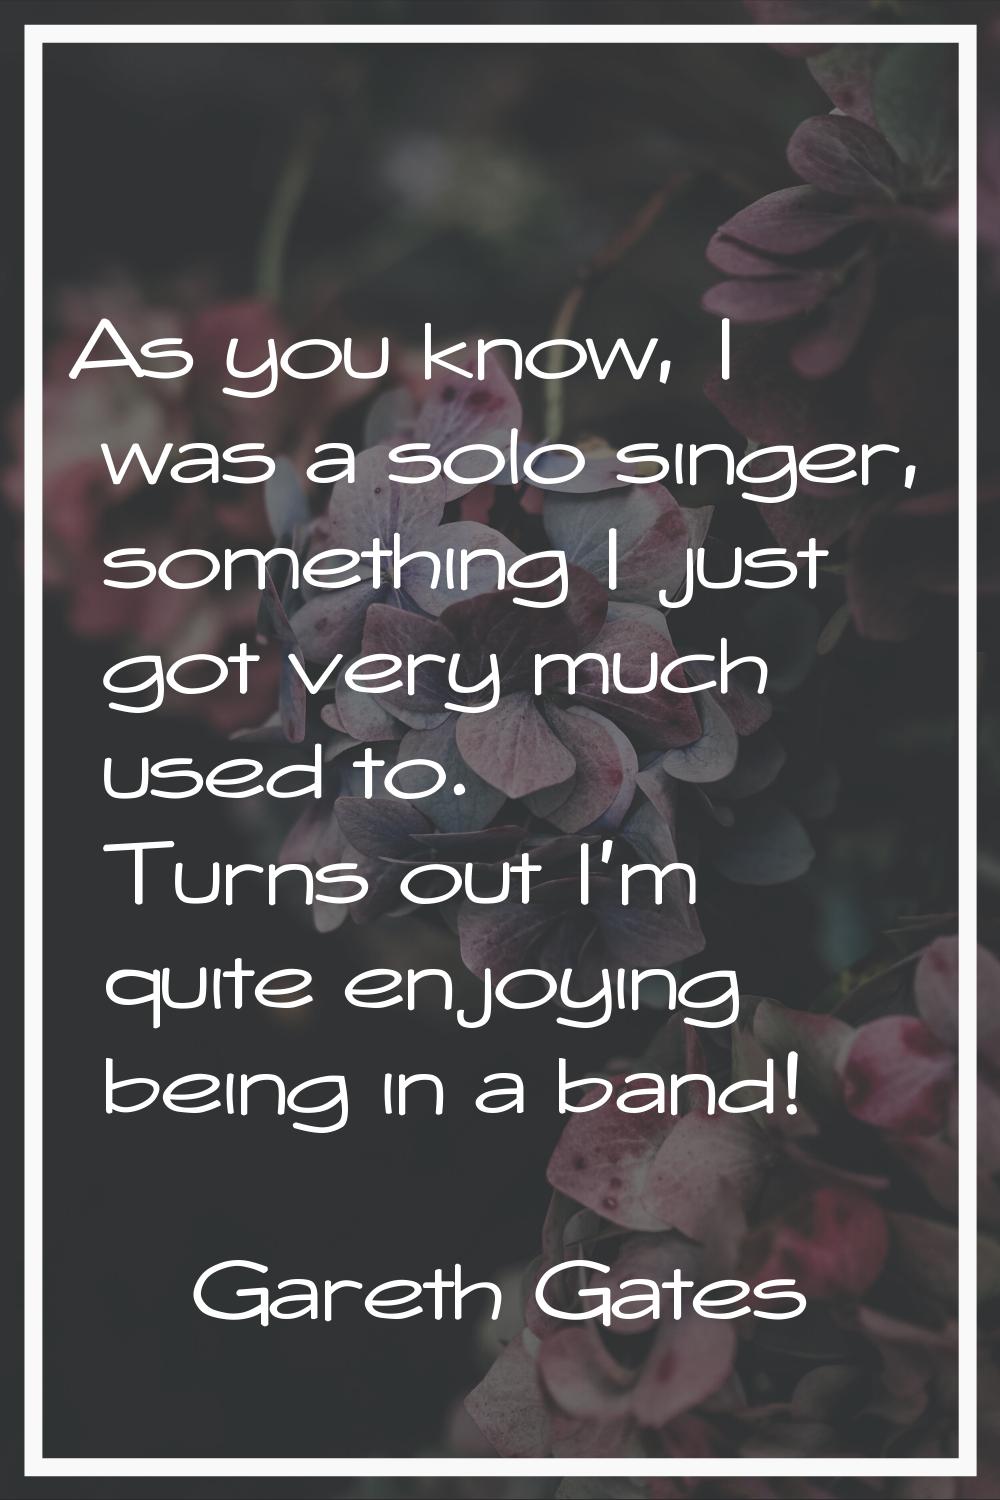 As you know, I was a solo singer, something I just got very much used to. Turns out I'm quite enjoy